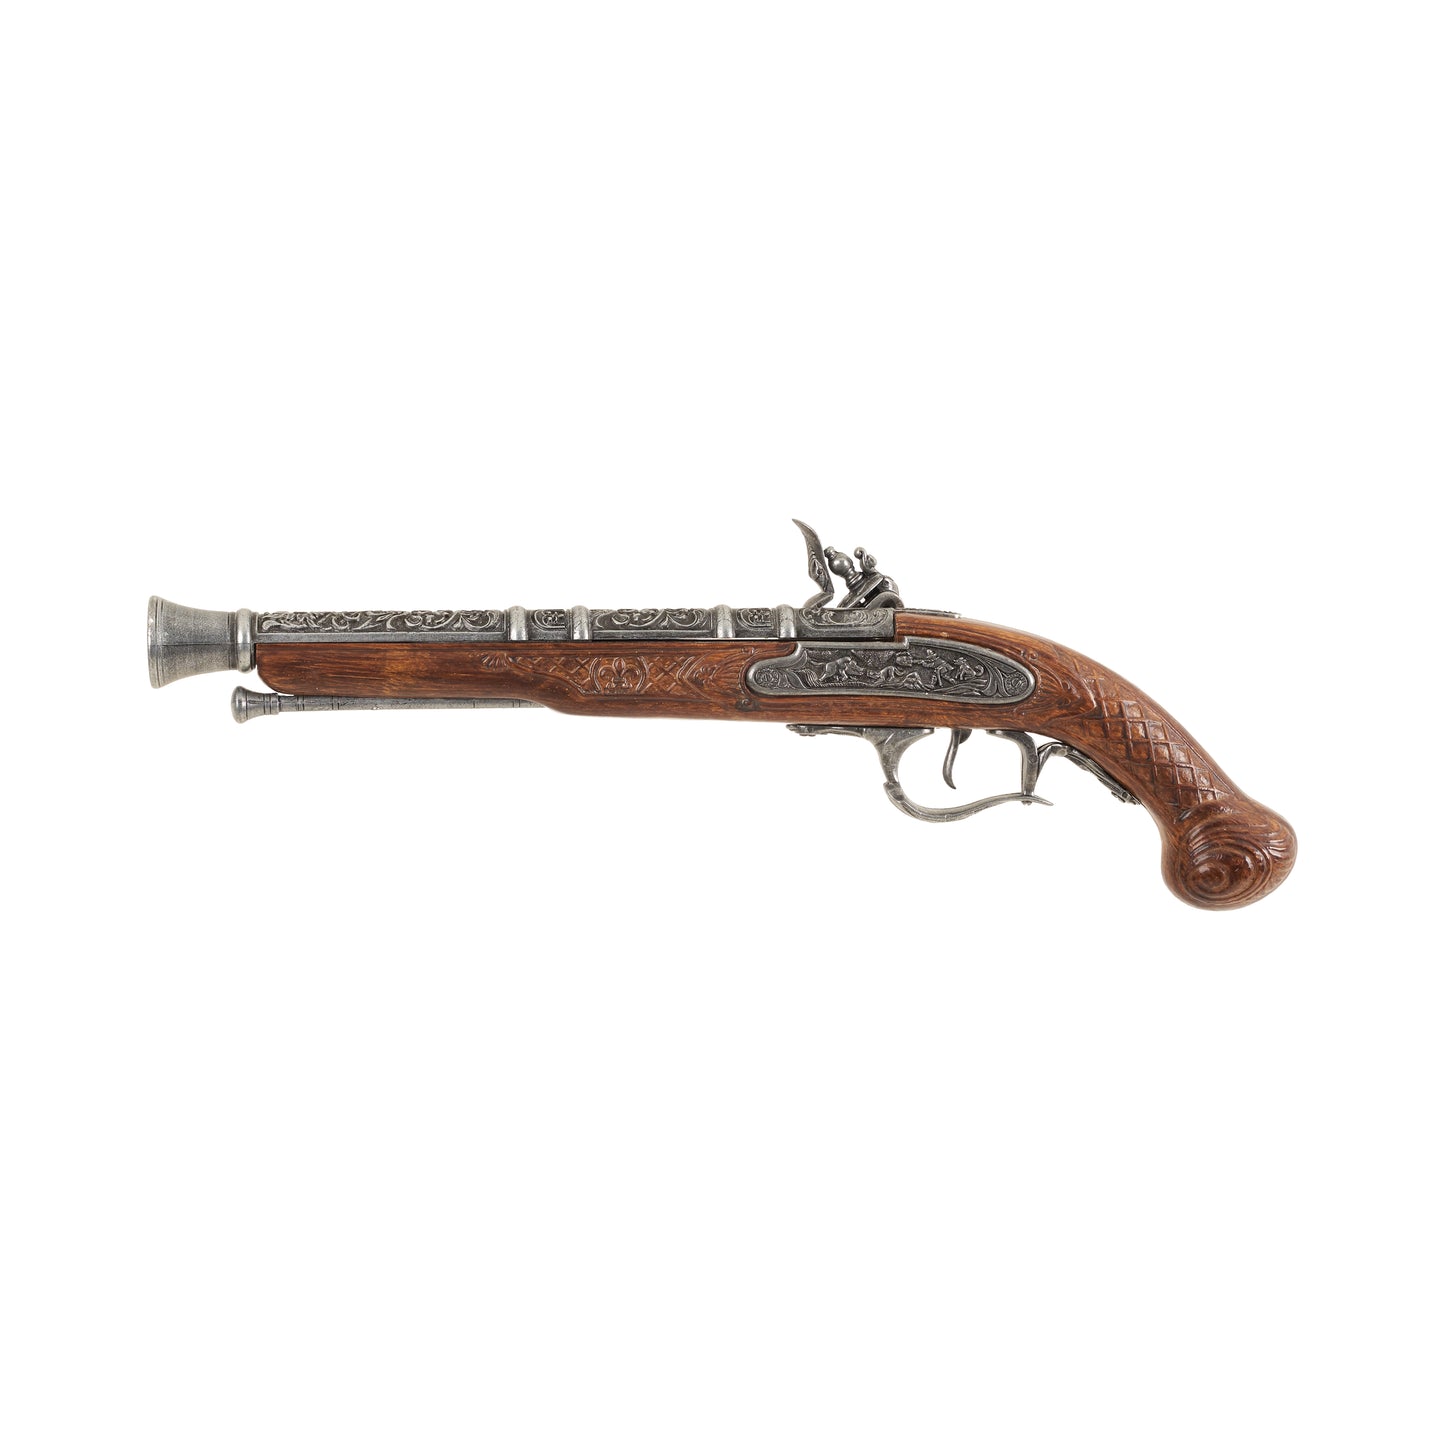 Left side view of the Replica 18th Century Arquebus Flintlock Pistol with intricately carved metal mechanisms, barrel, and carved faux wood grip.